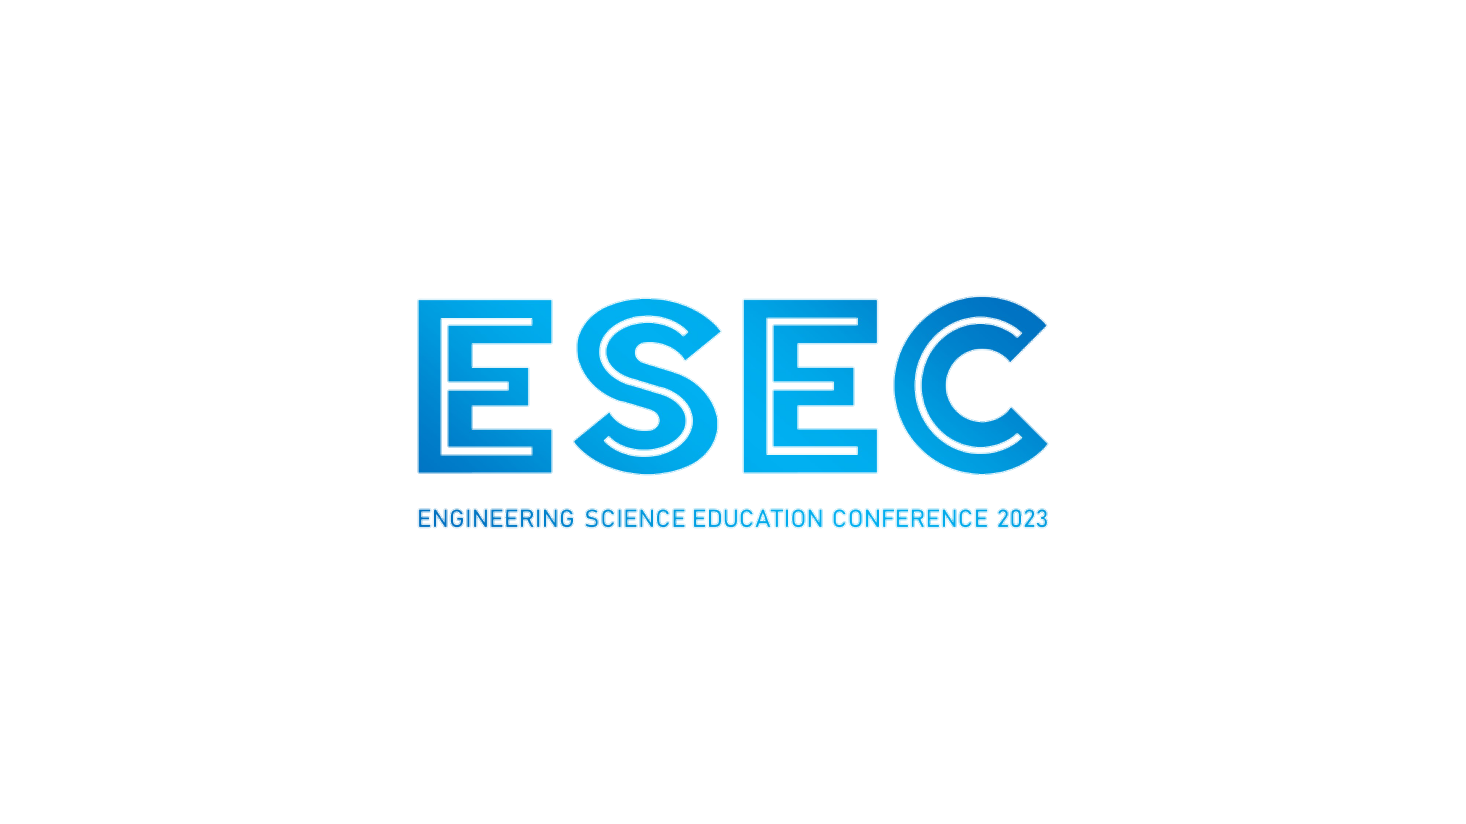 Engineering Science Conference 2023 Logo